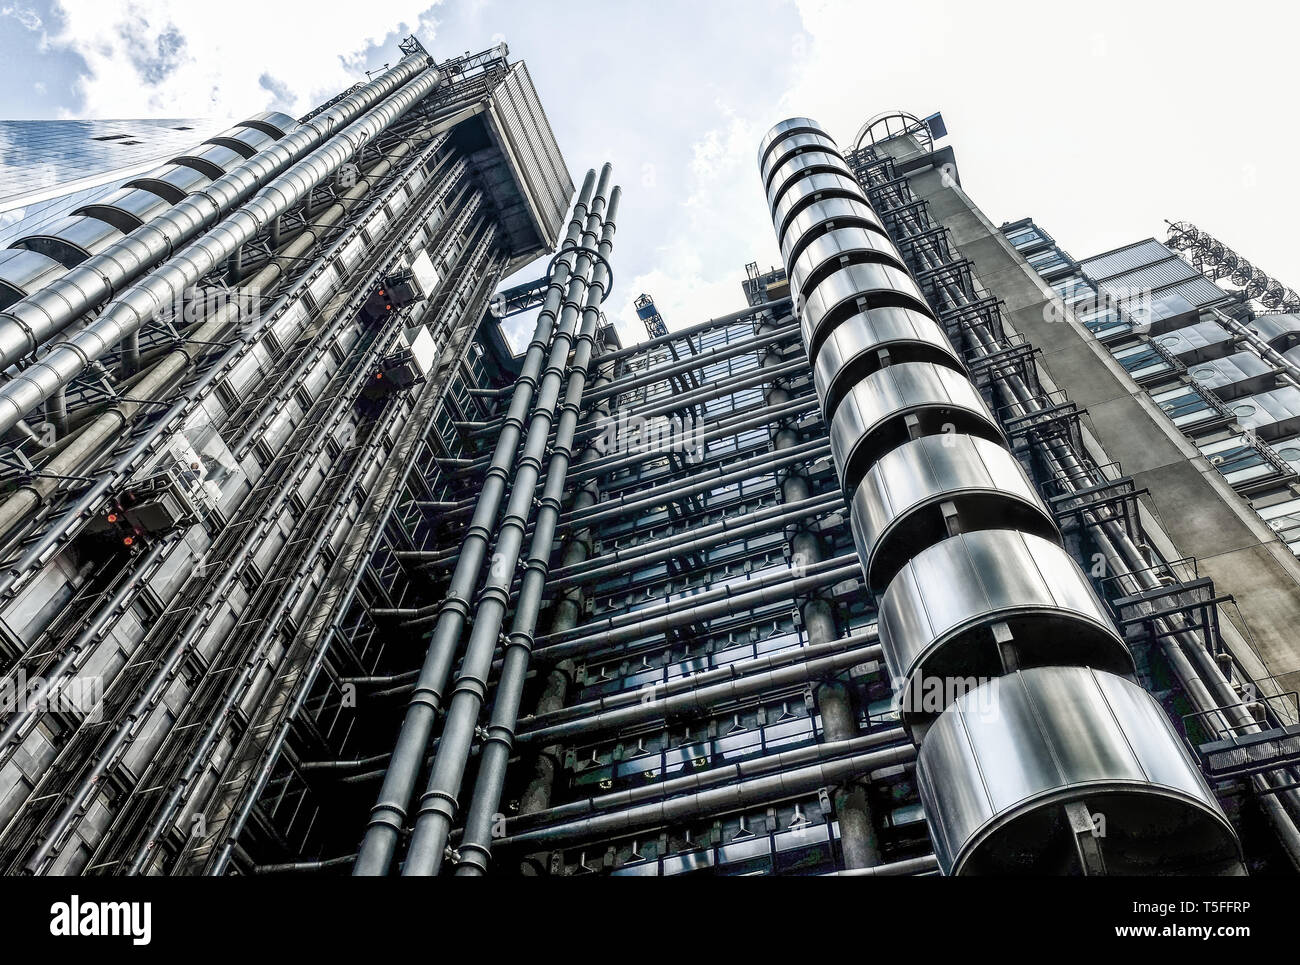 London, UK, Aug 2018, facade of The Lloyd's building in the City of London. Stock Photo